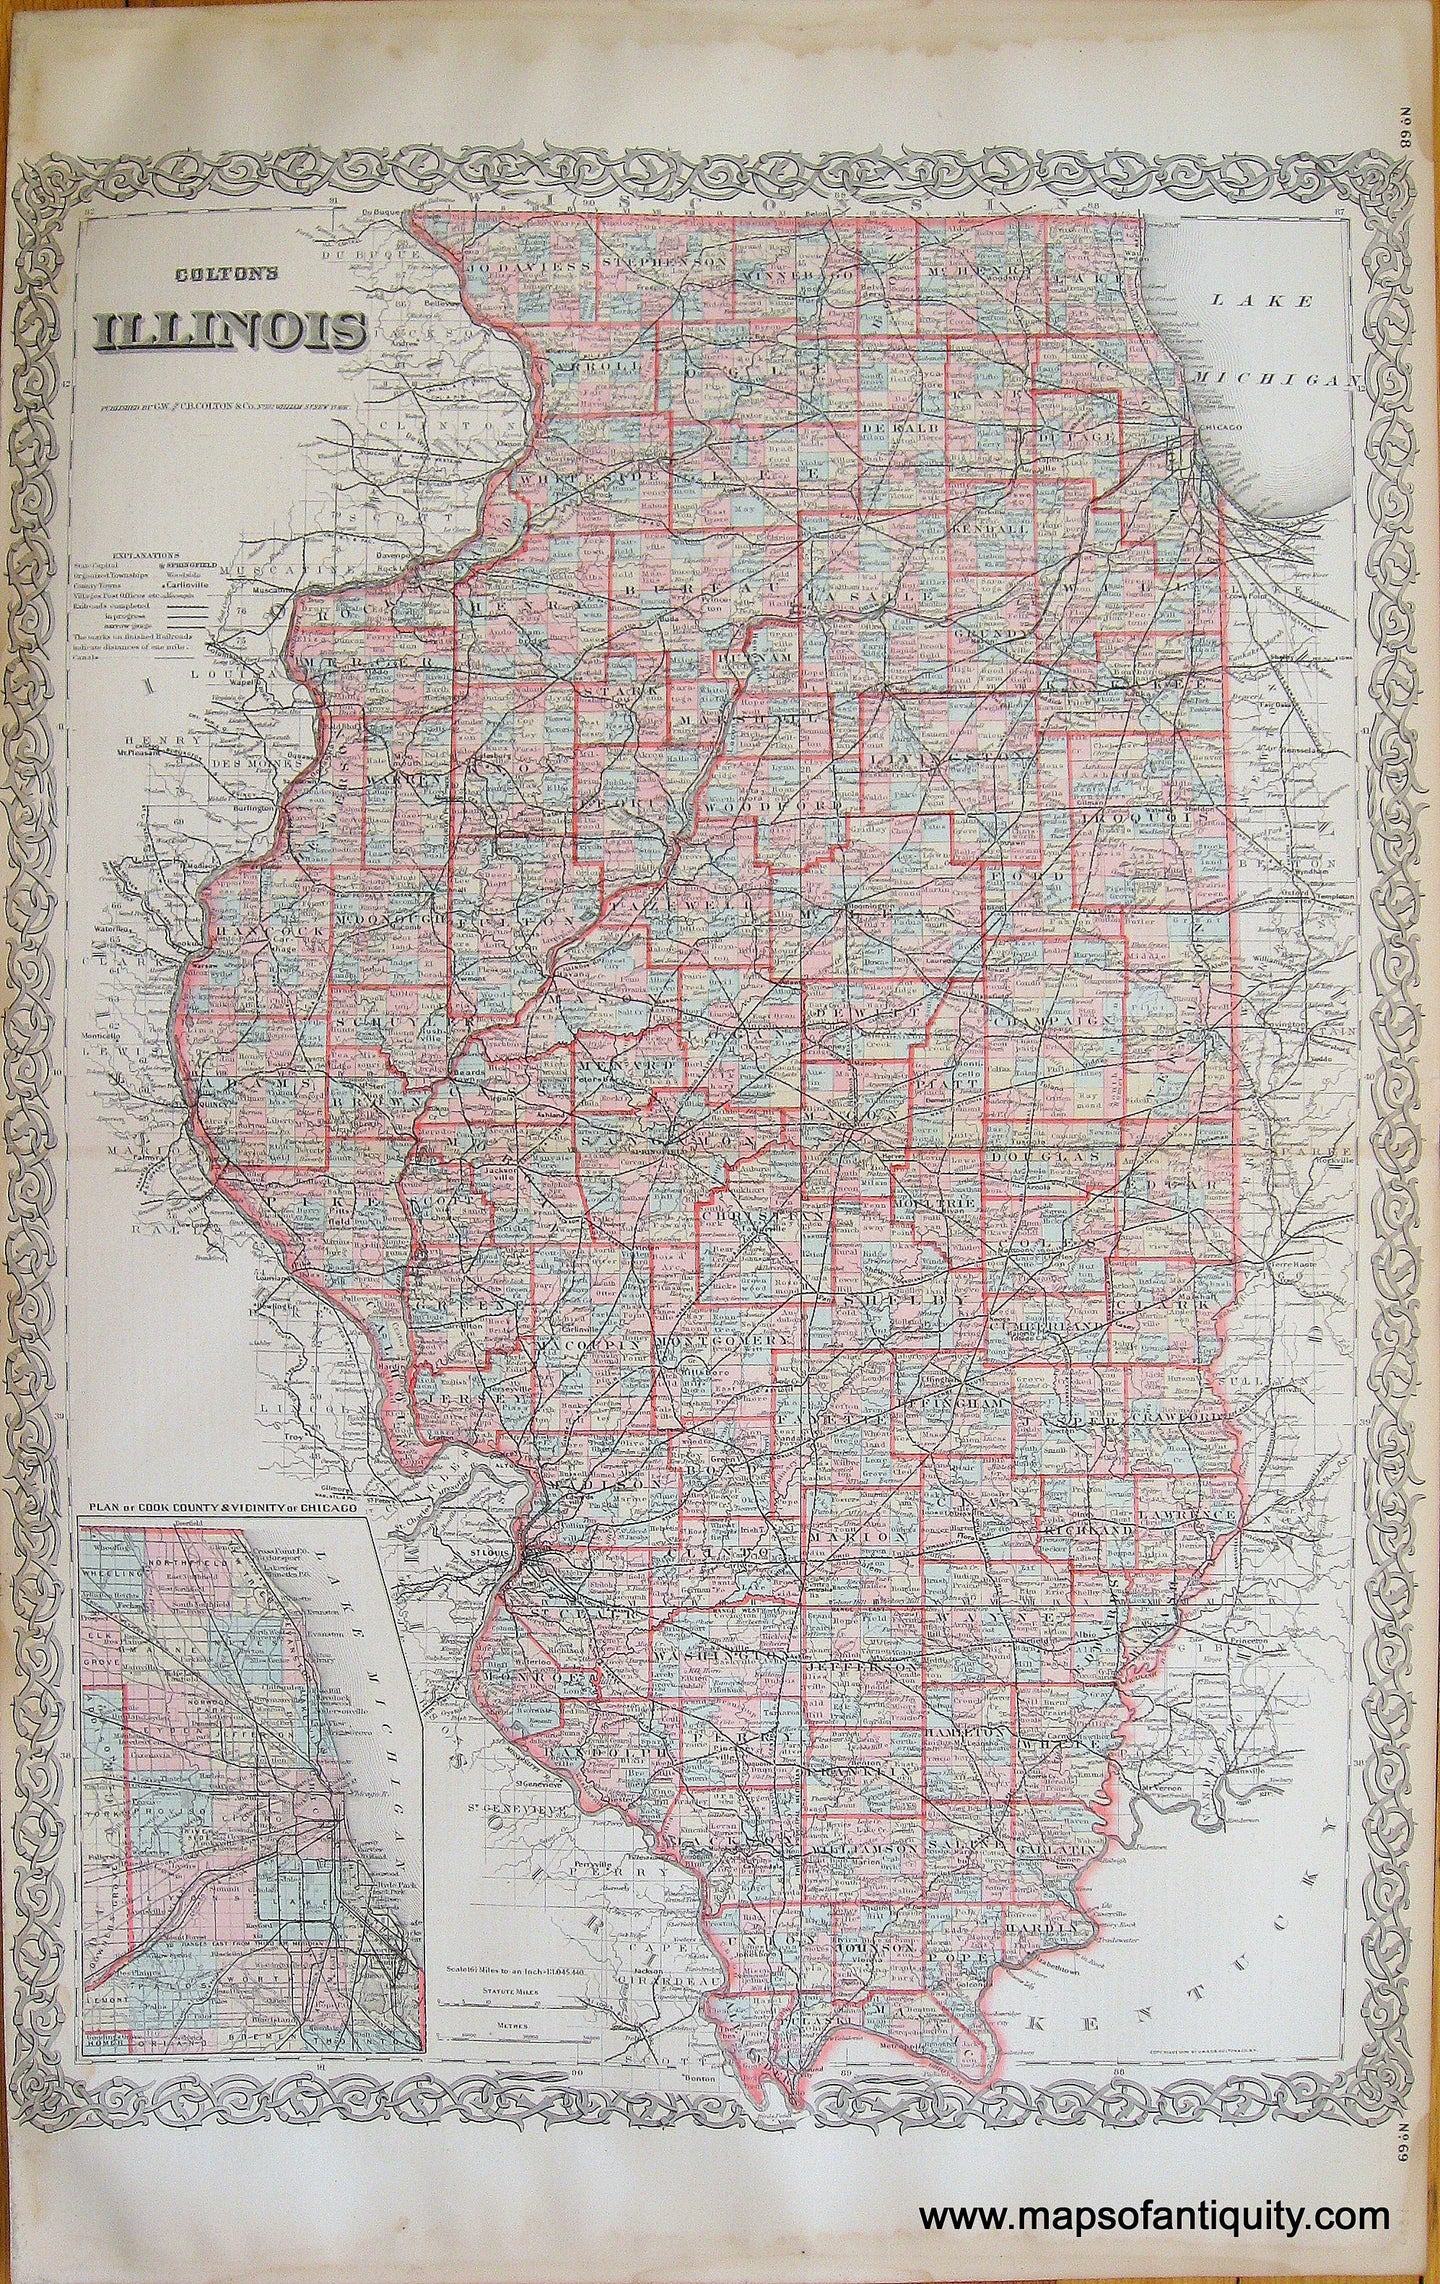 Antique-Hand-Colored-Map-Coltons-Illinois-1887-Colton-Maps-Of-Antiquity